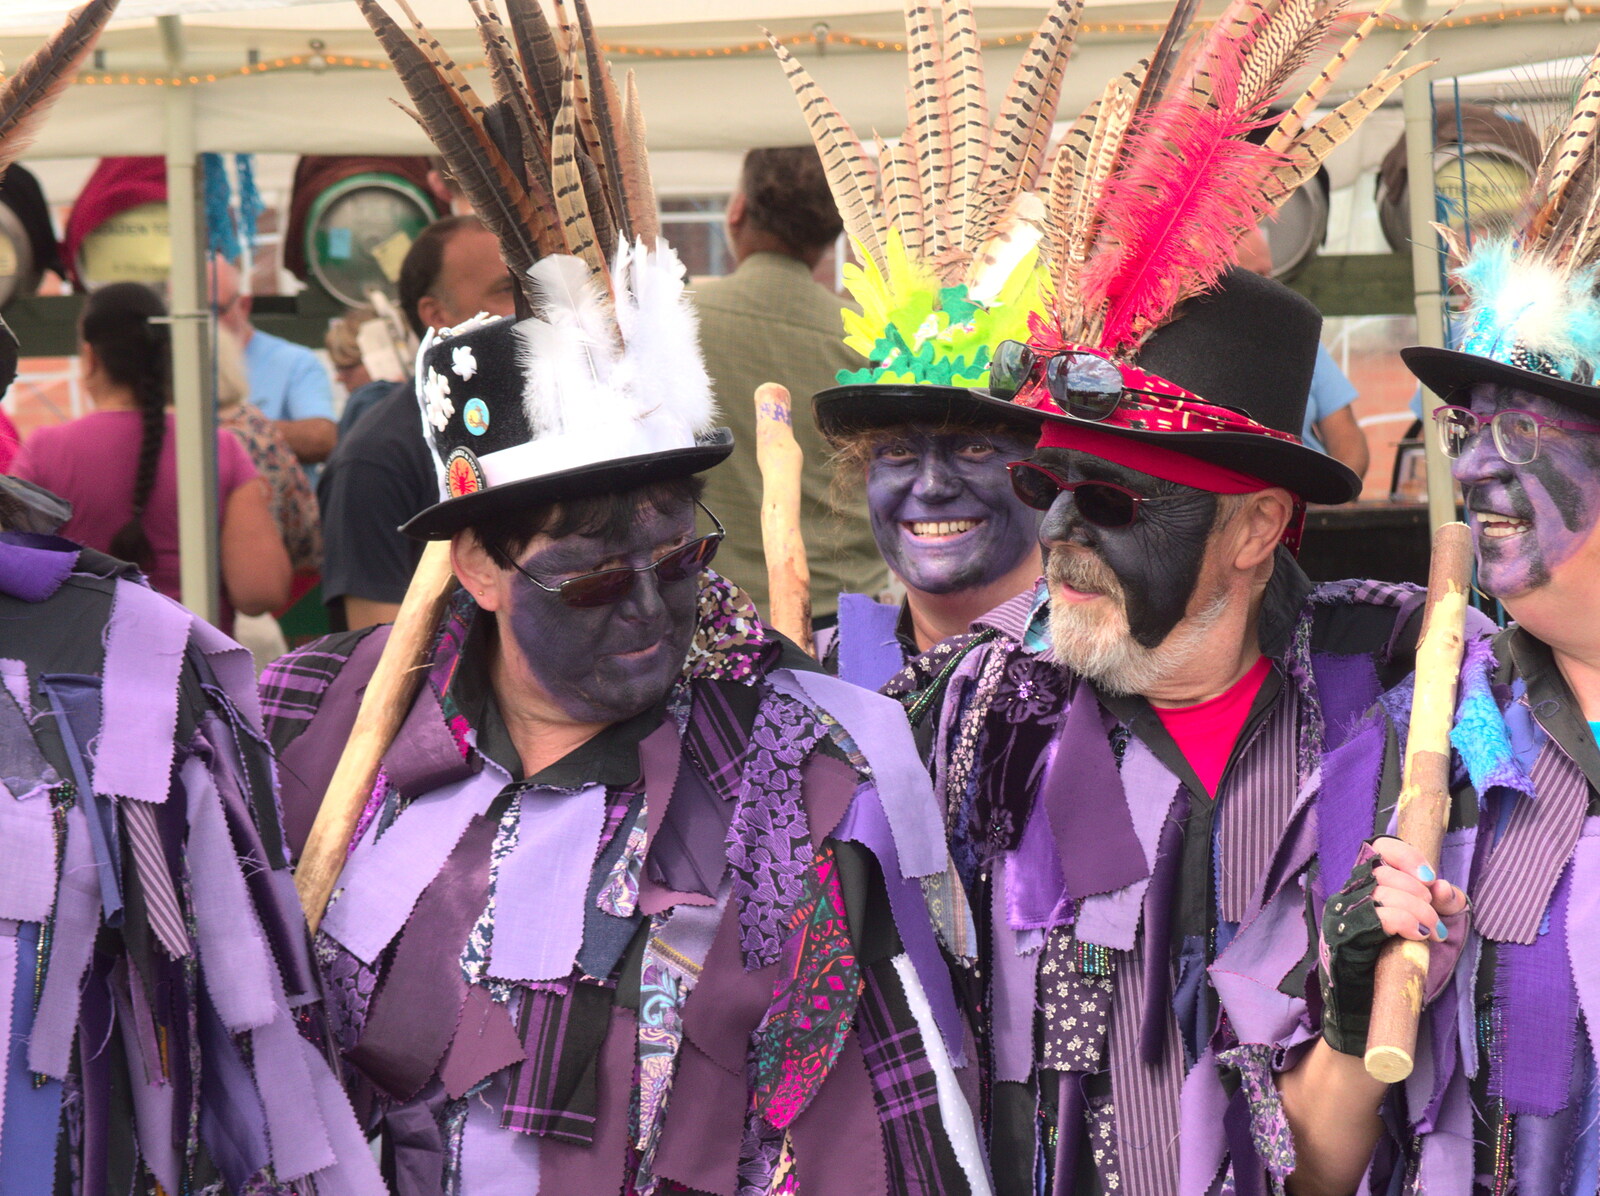 Purple faces and pheasant feathers from The Humpty Dumpty Beer Festival, Reedham, Norfolk - 22nd July 2017